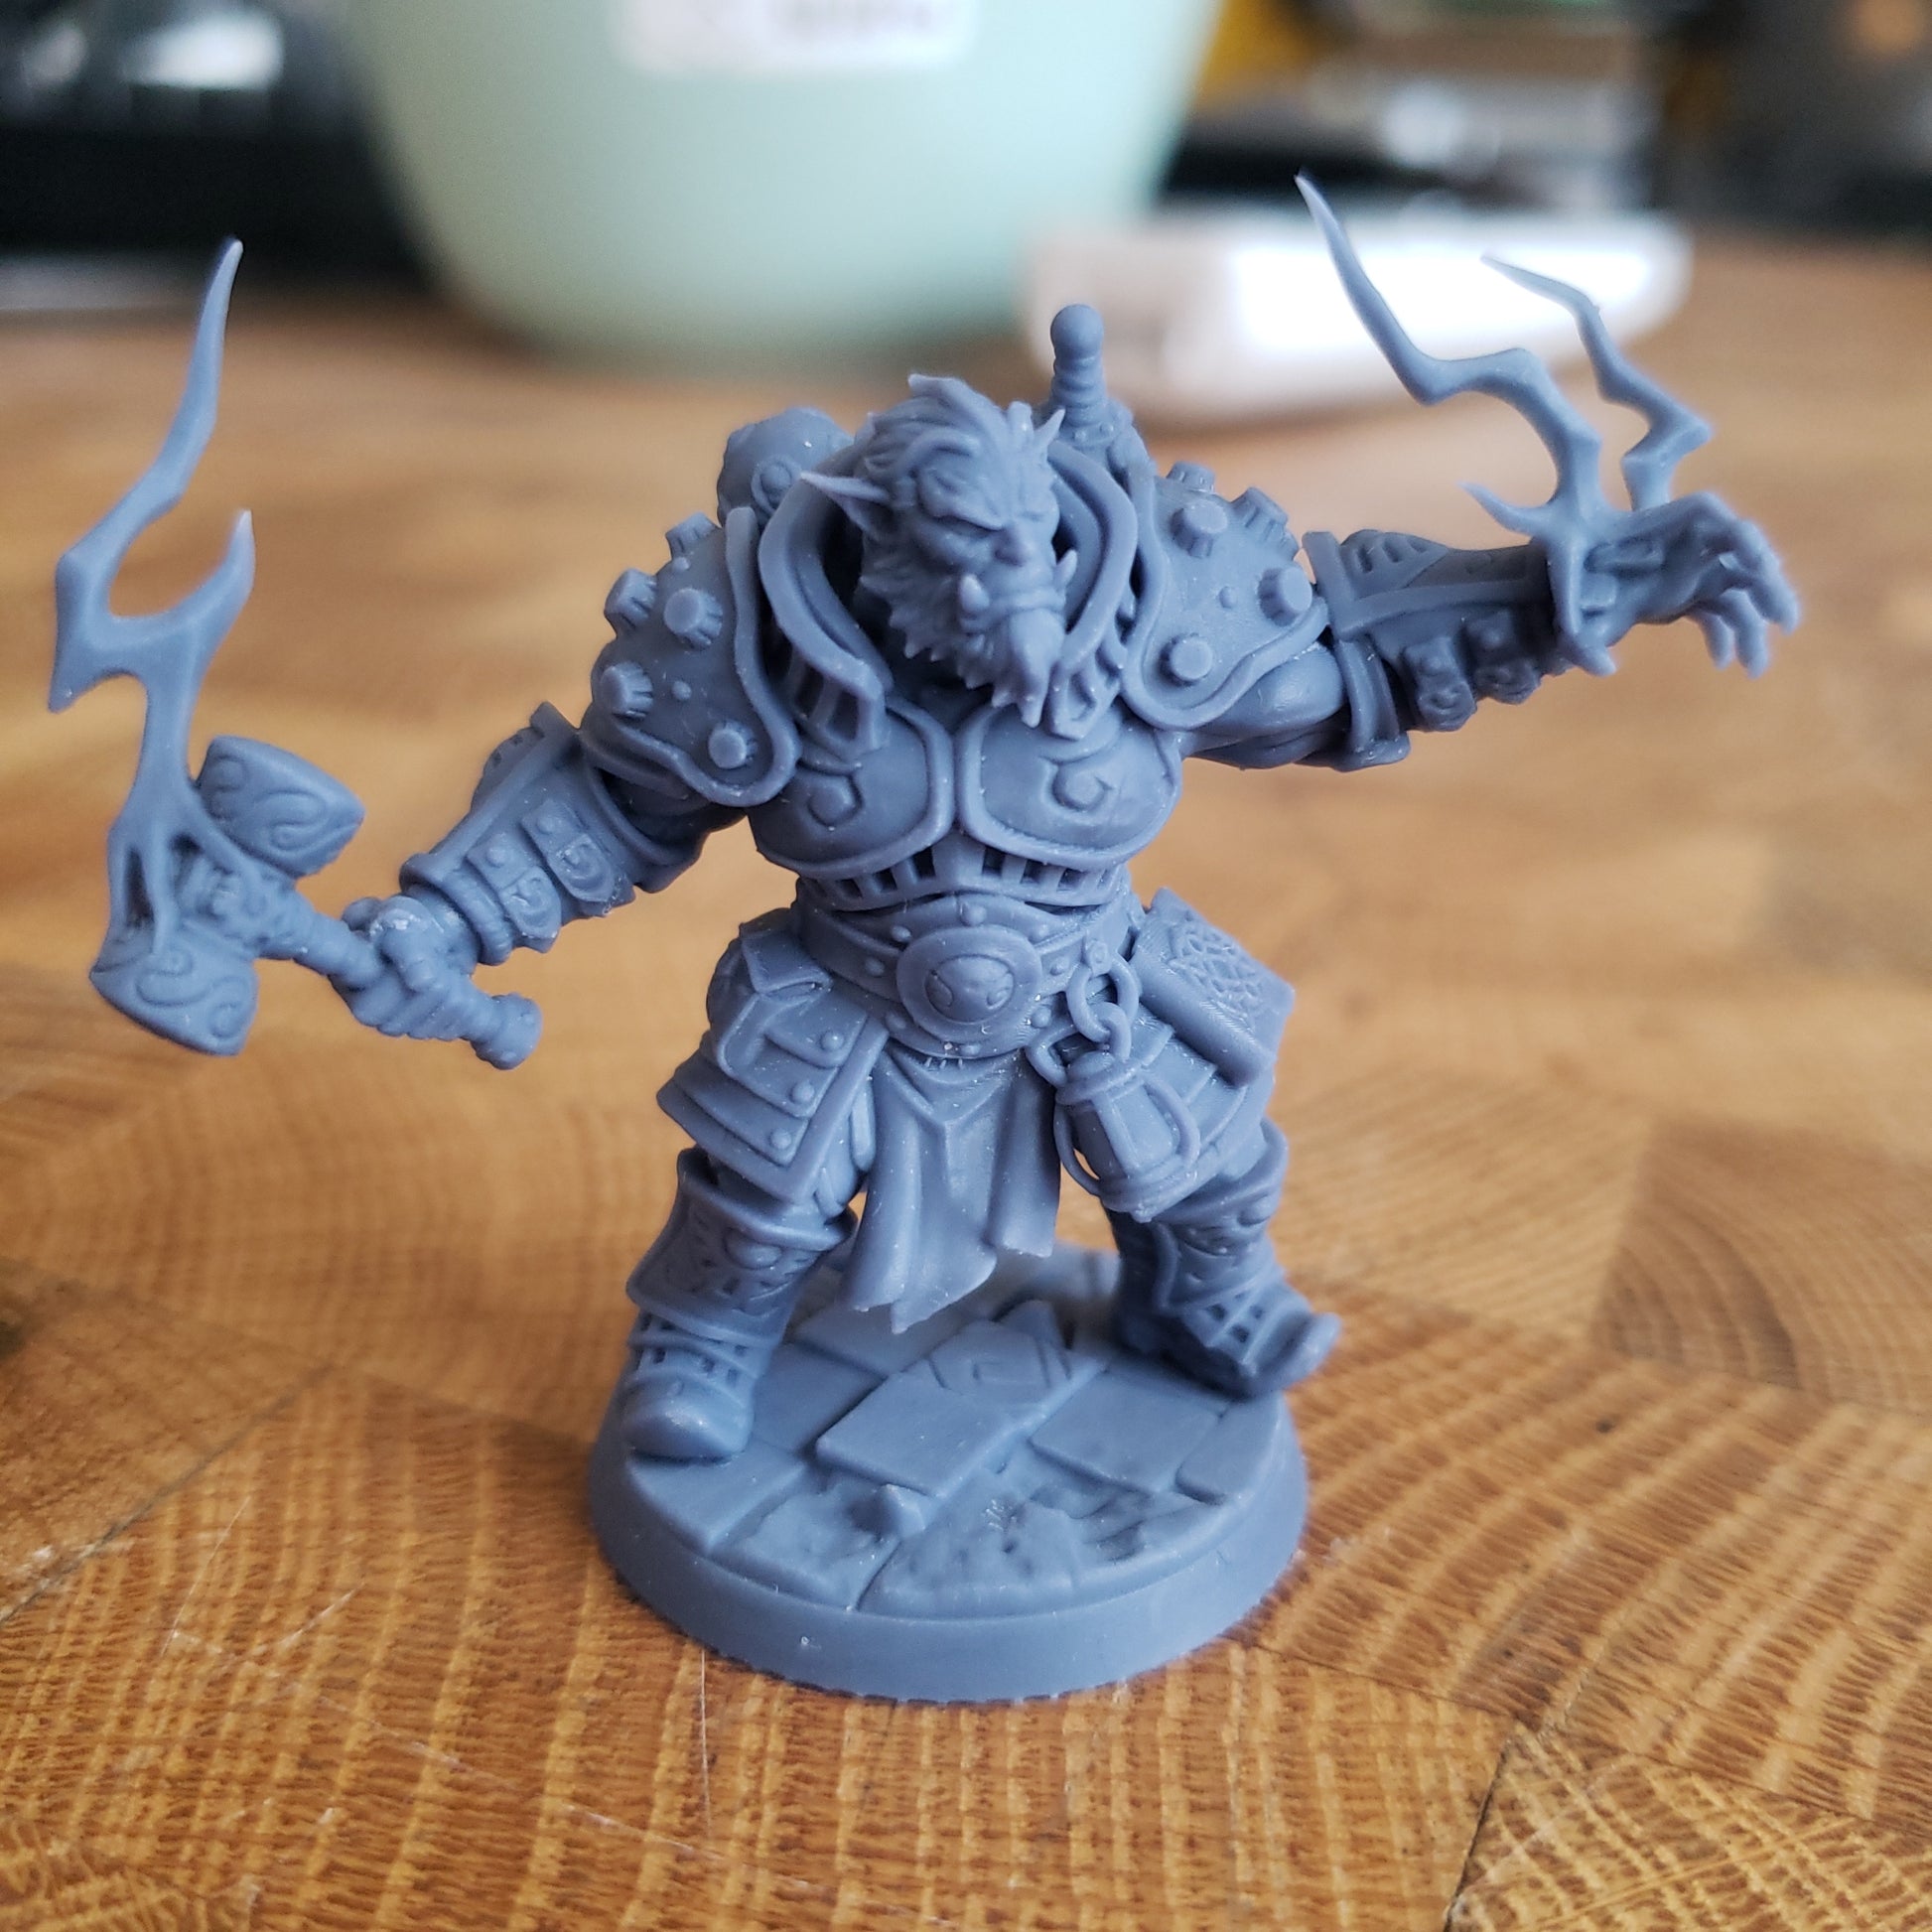 Image shows an example of a 3D printed bugbear sorcerer gaming miniature printed in-house at All Systems Go